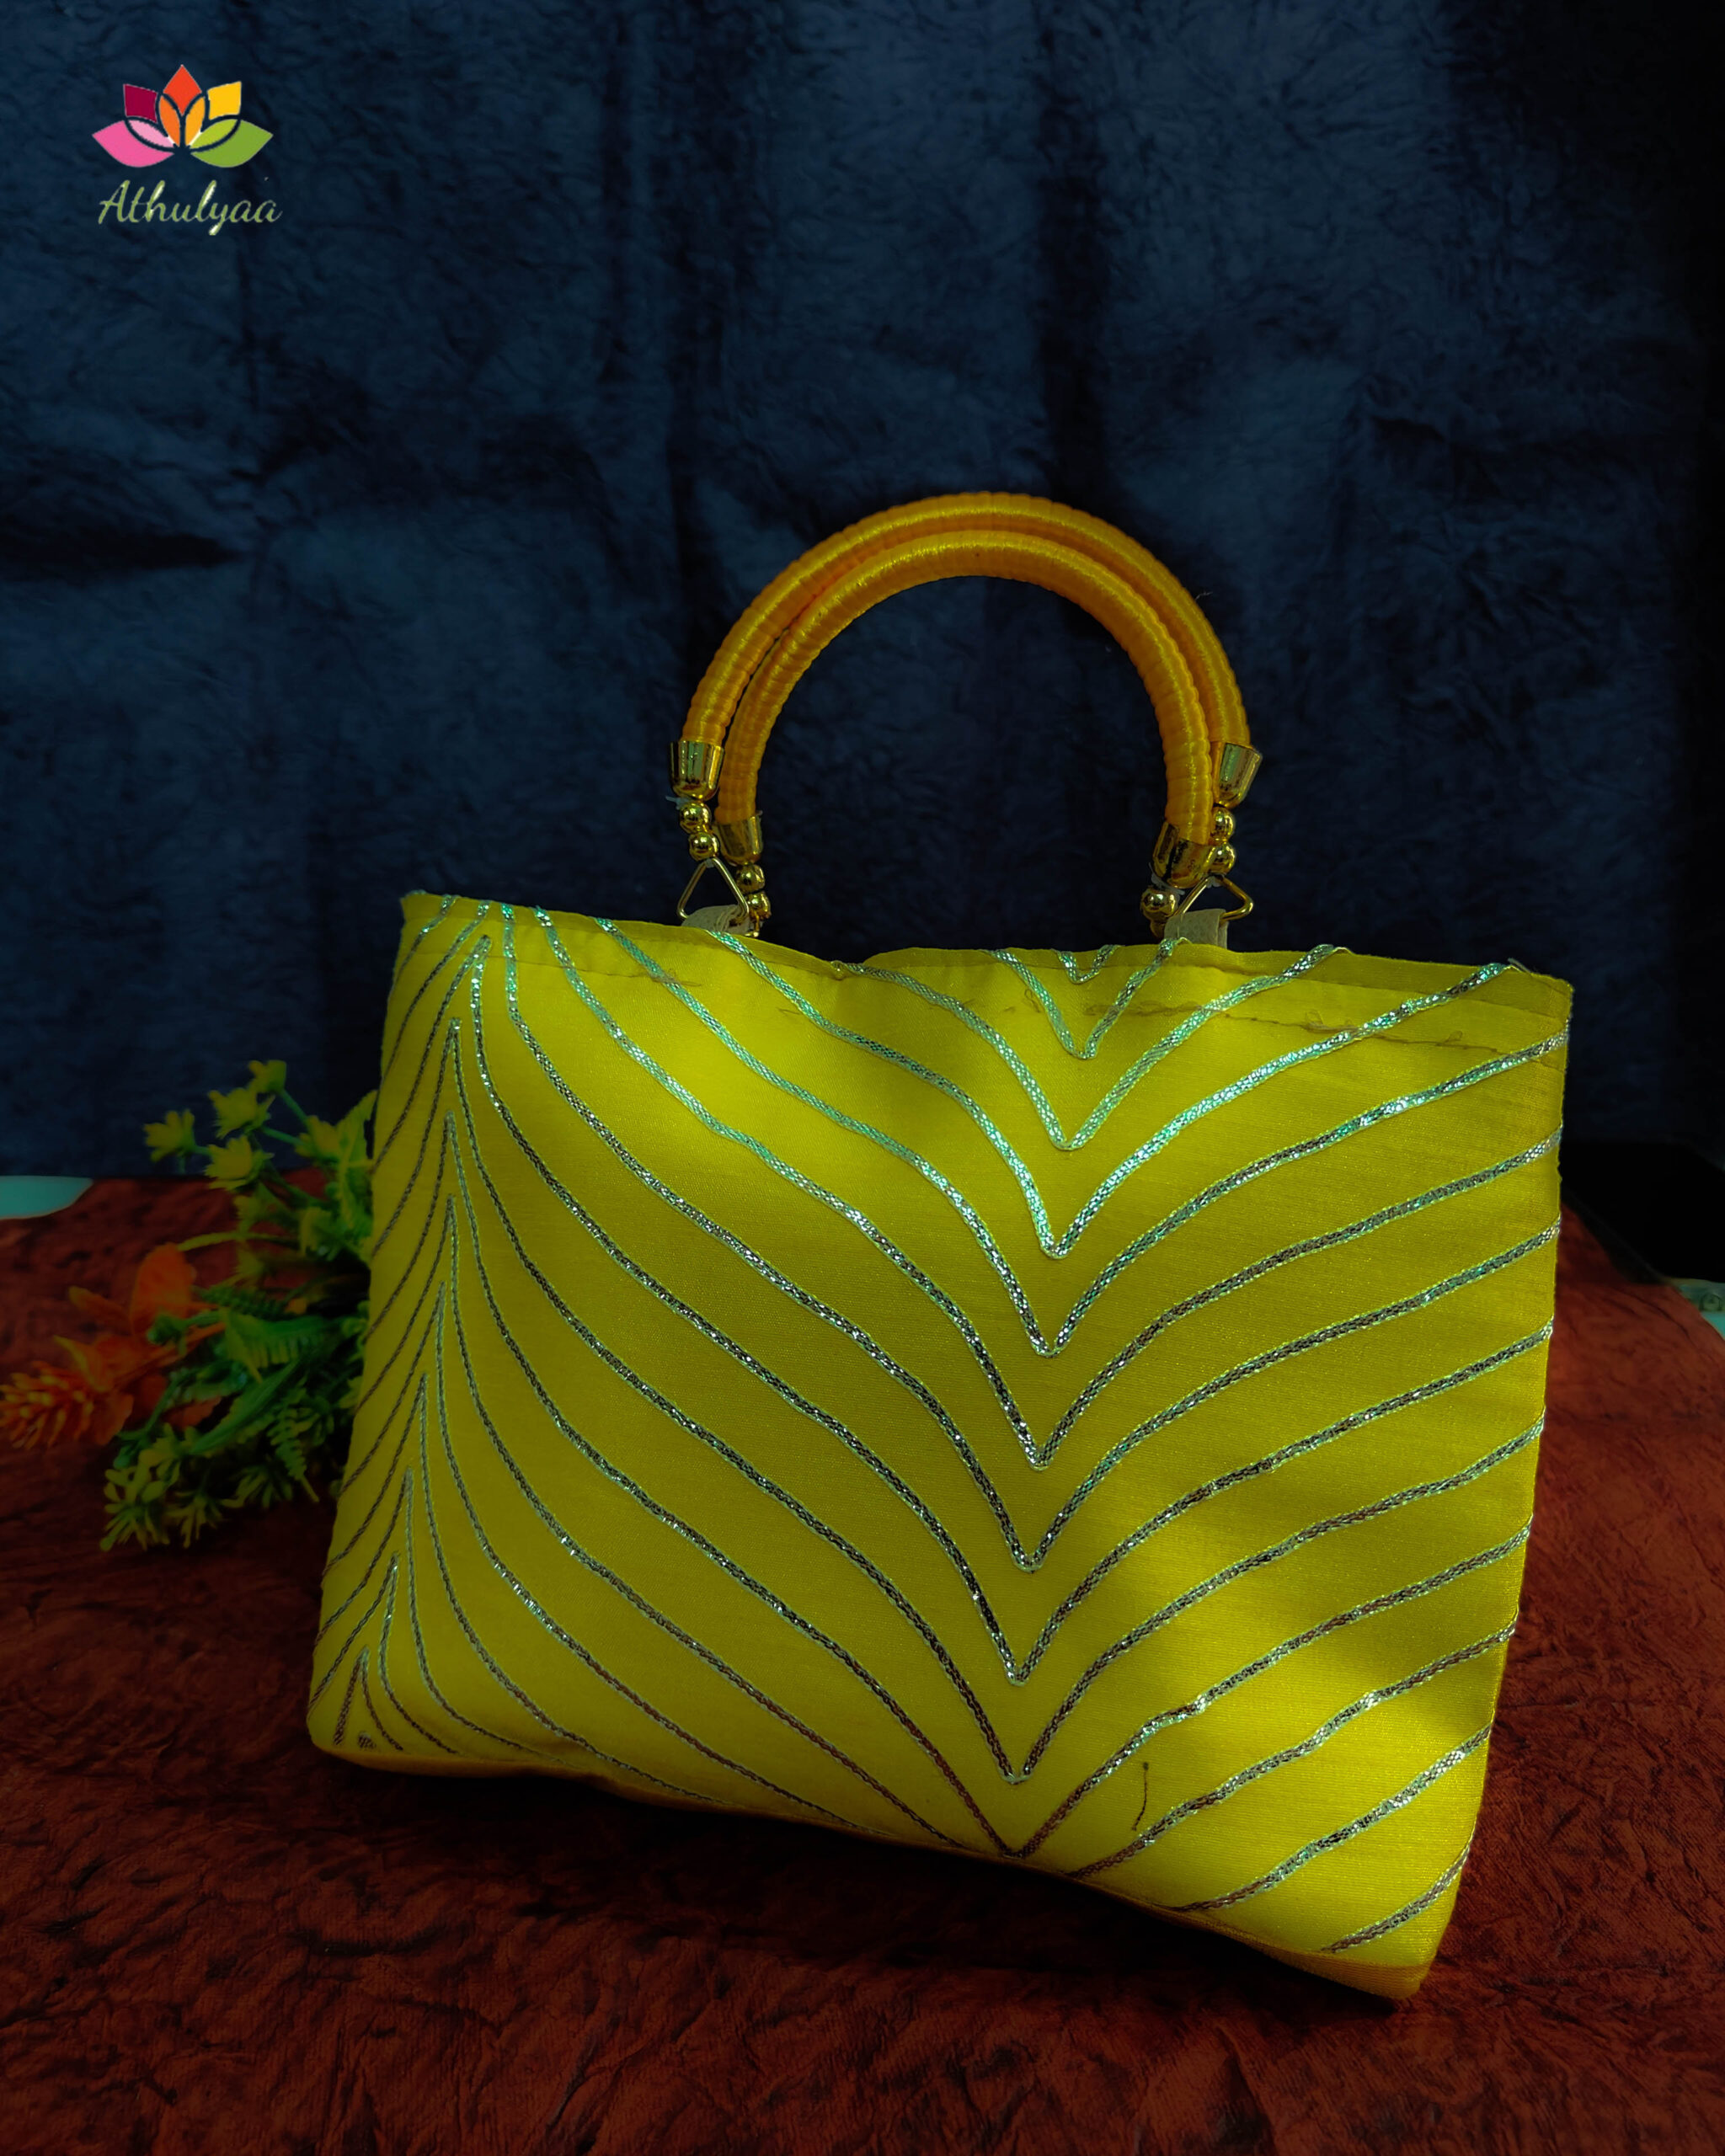 Premium Patola Accessories for return gifts | Fancy bags, Handmade bags,  Purses and bags